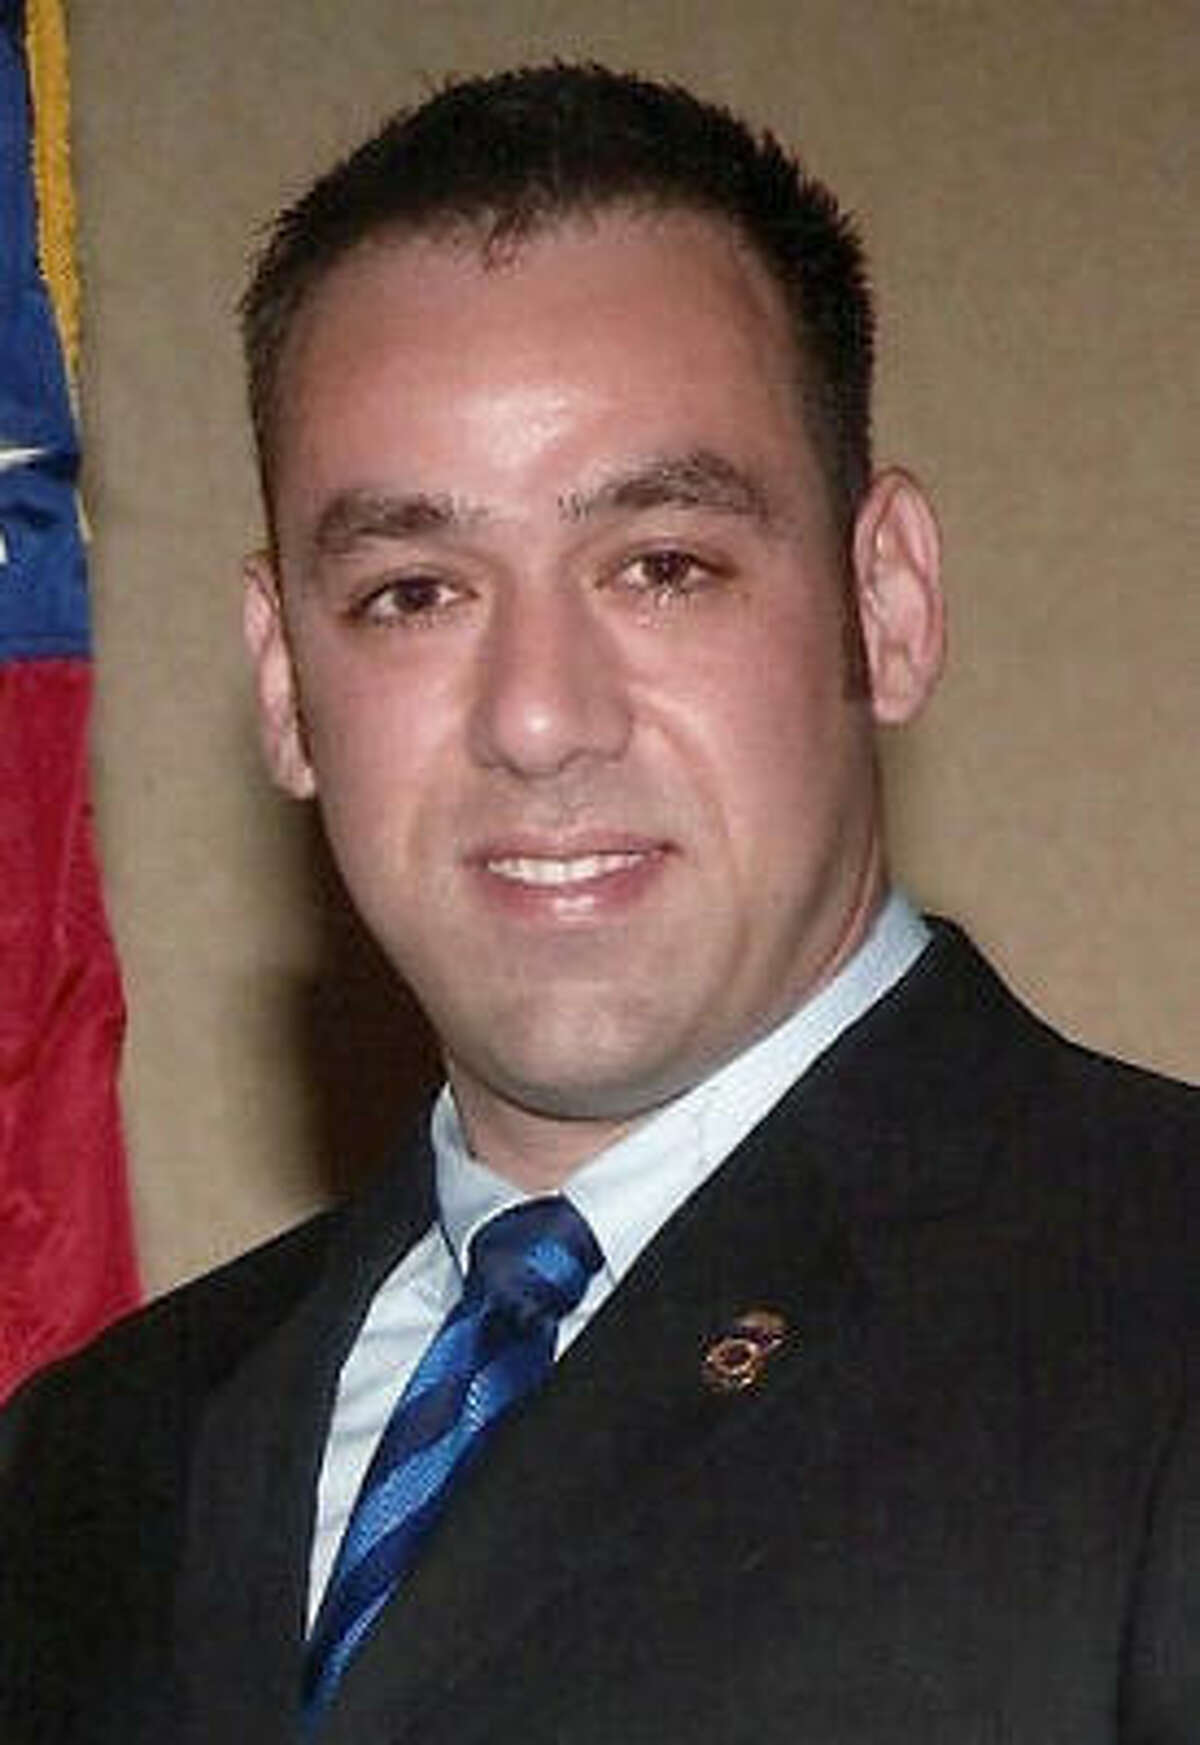 U.S. Immigration and Customs Enforcement Special Agent Jaime Zapata was shot and killed in the line of duty Tuesday after he was attacked while driving between Monterrey, Mexico, and Mexico City.